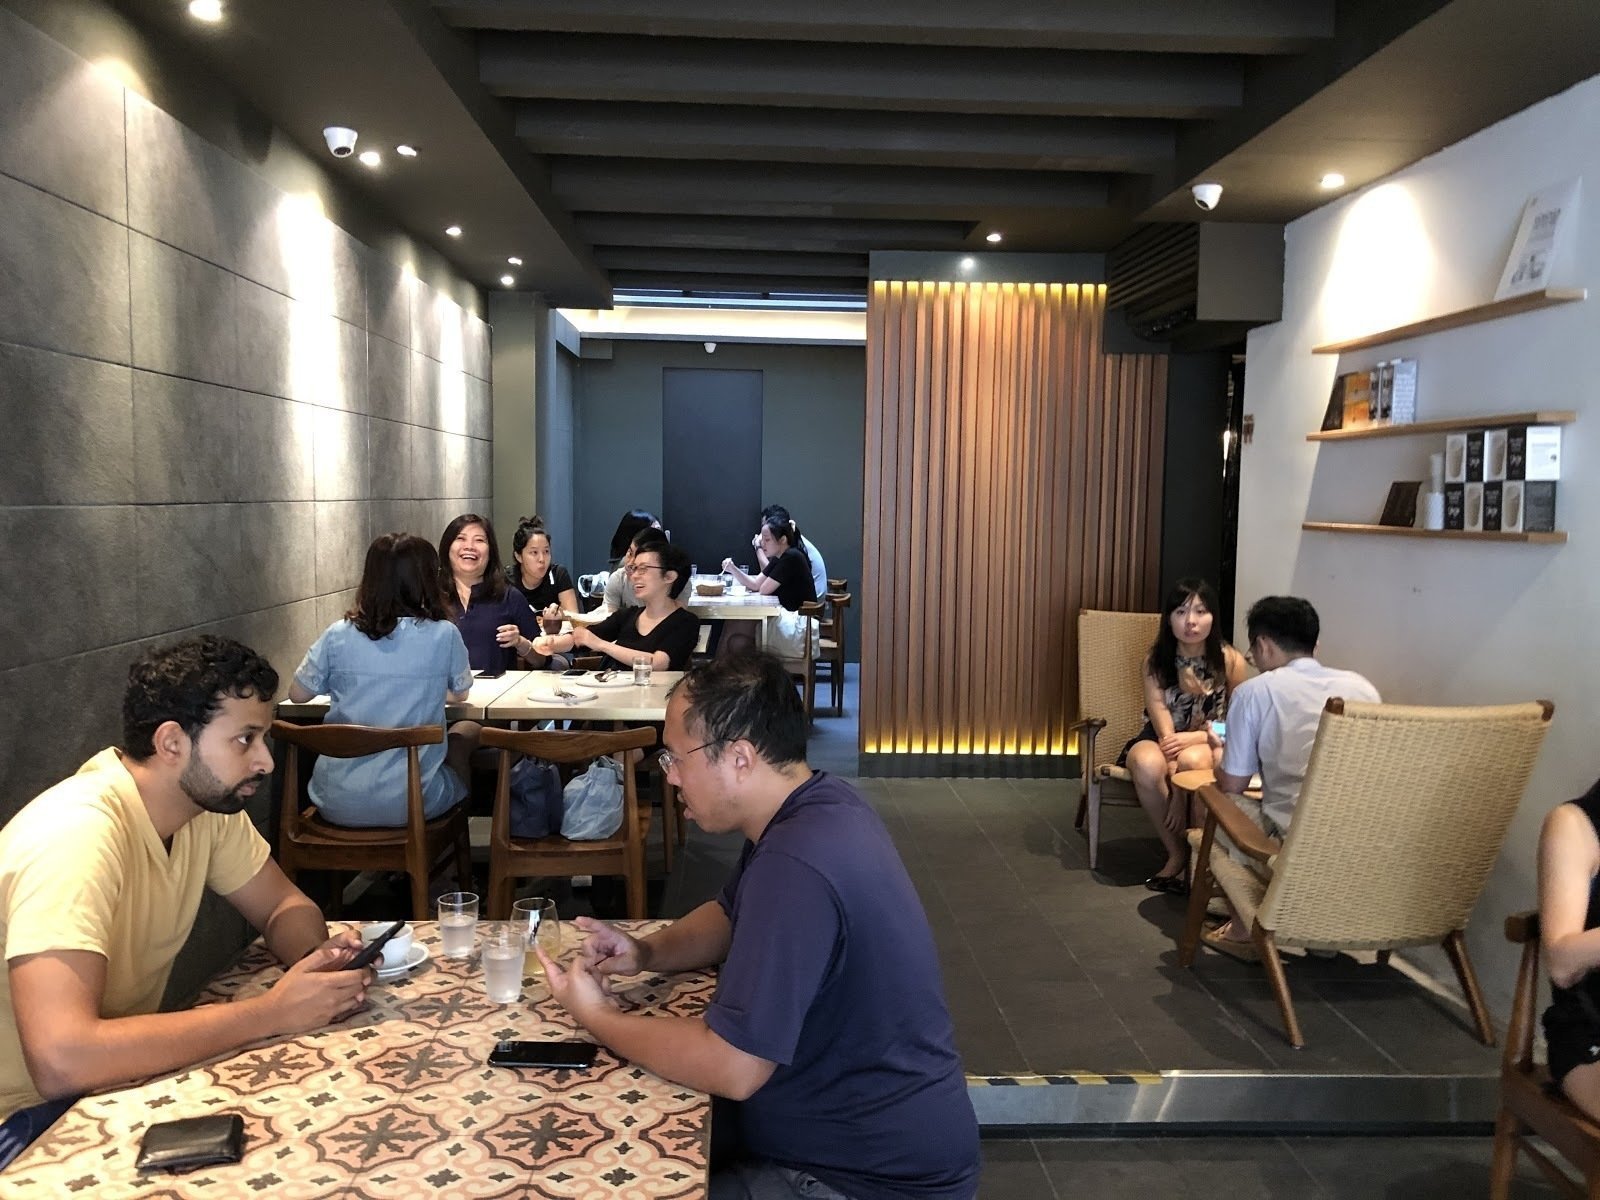 <span class="translation_missing" title="translation missing: en.meta.location_title, location_name: Parallel Cafe (Club Street), city: Singapore">Location Title</span>